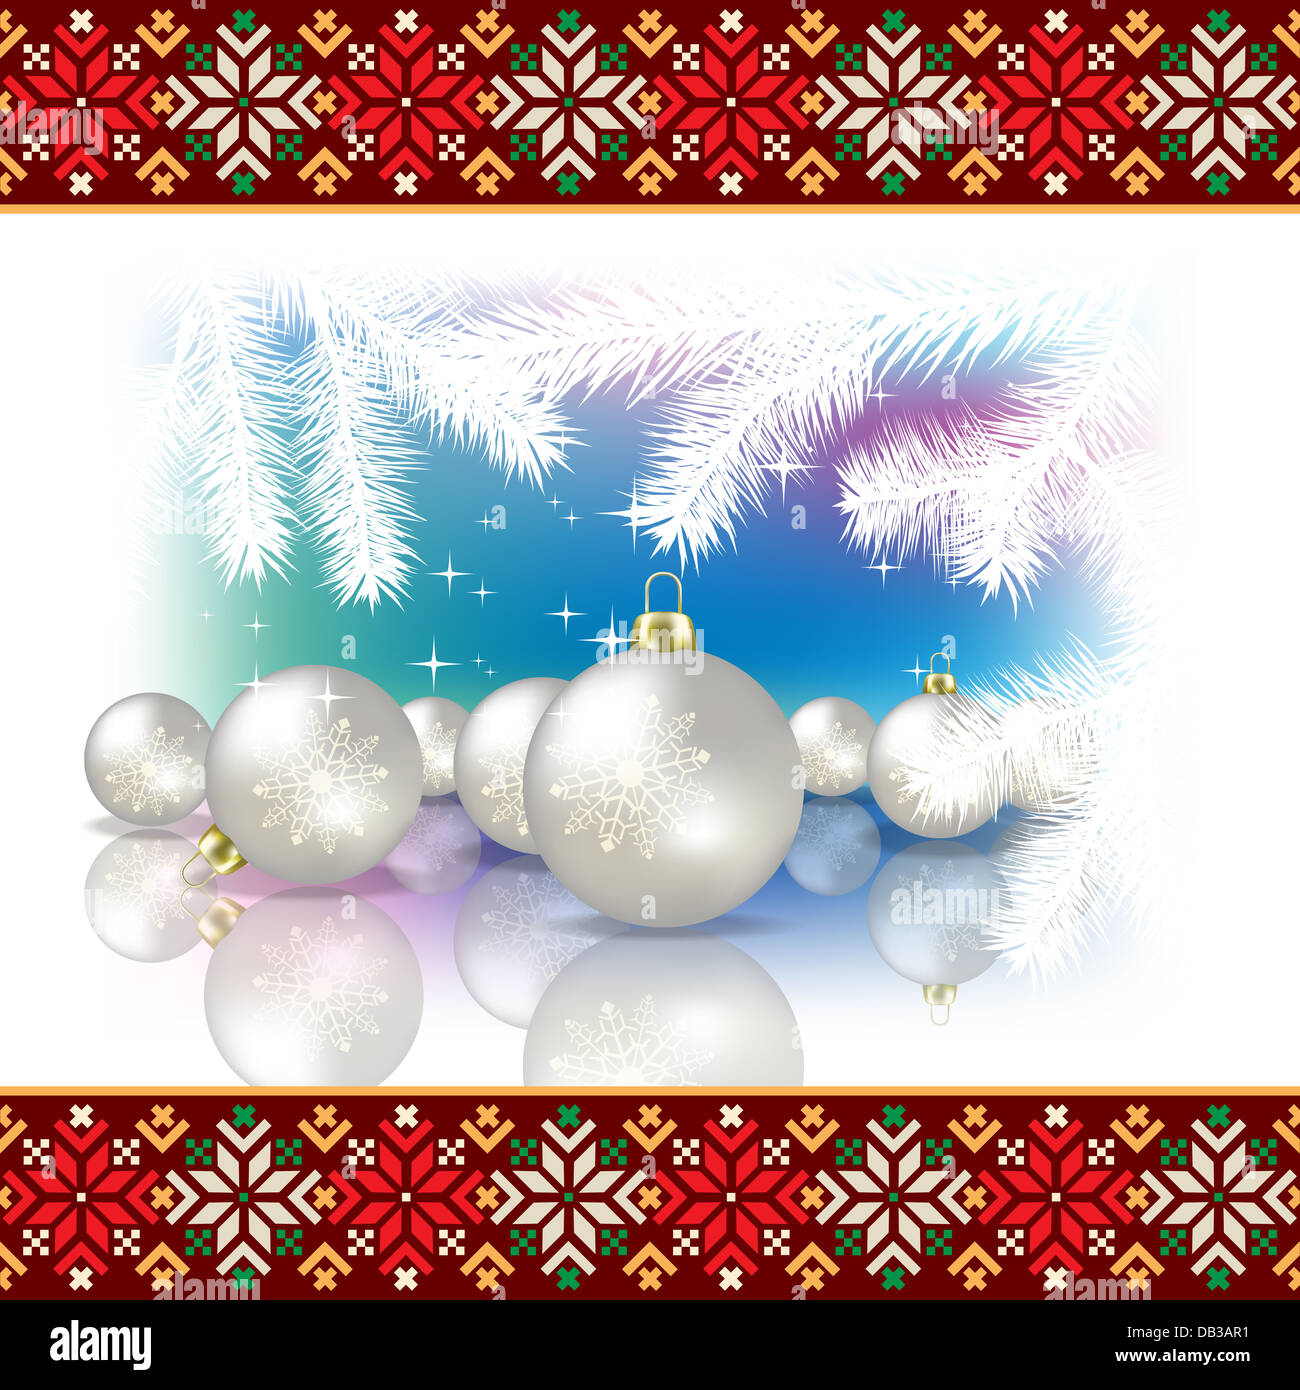 Abstract celebration background with Christmas pearl decorations